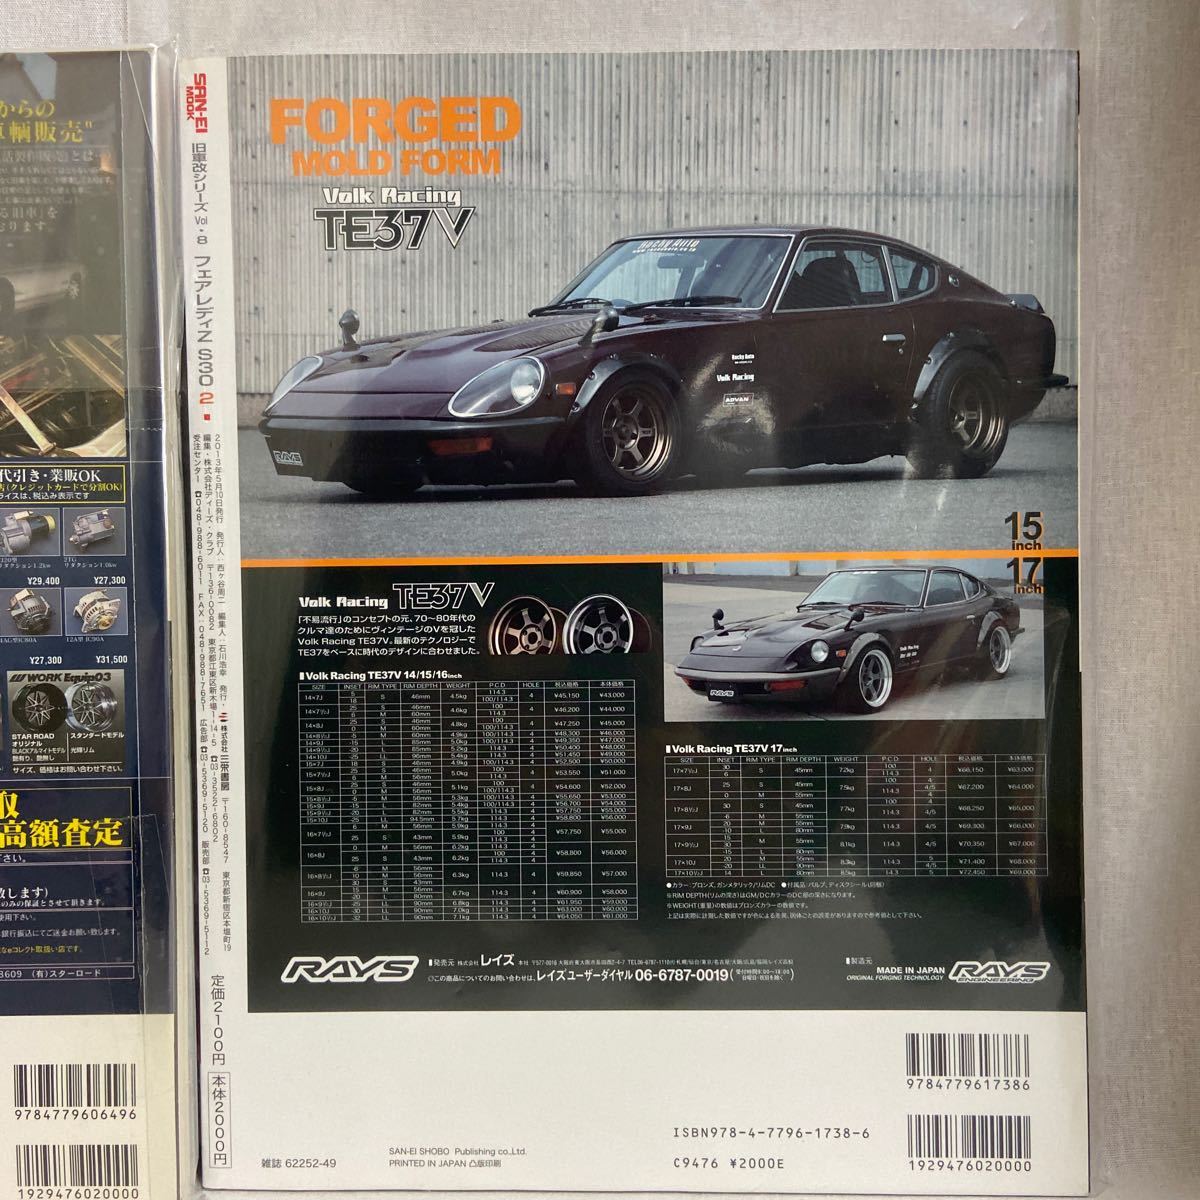  rare G Works old car modified series #1 #2 set Nissan Fairlady Z S30 Z modified. all famous car restore L type engine maintenance maintenance out of print book